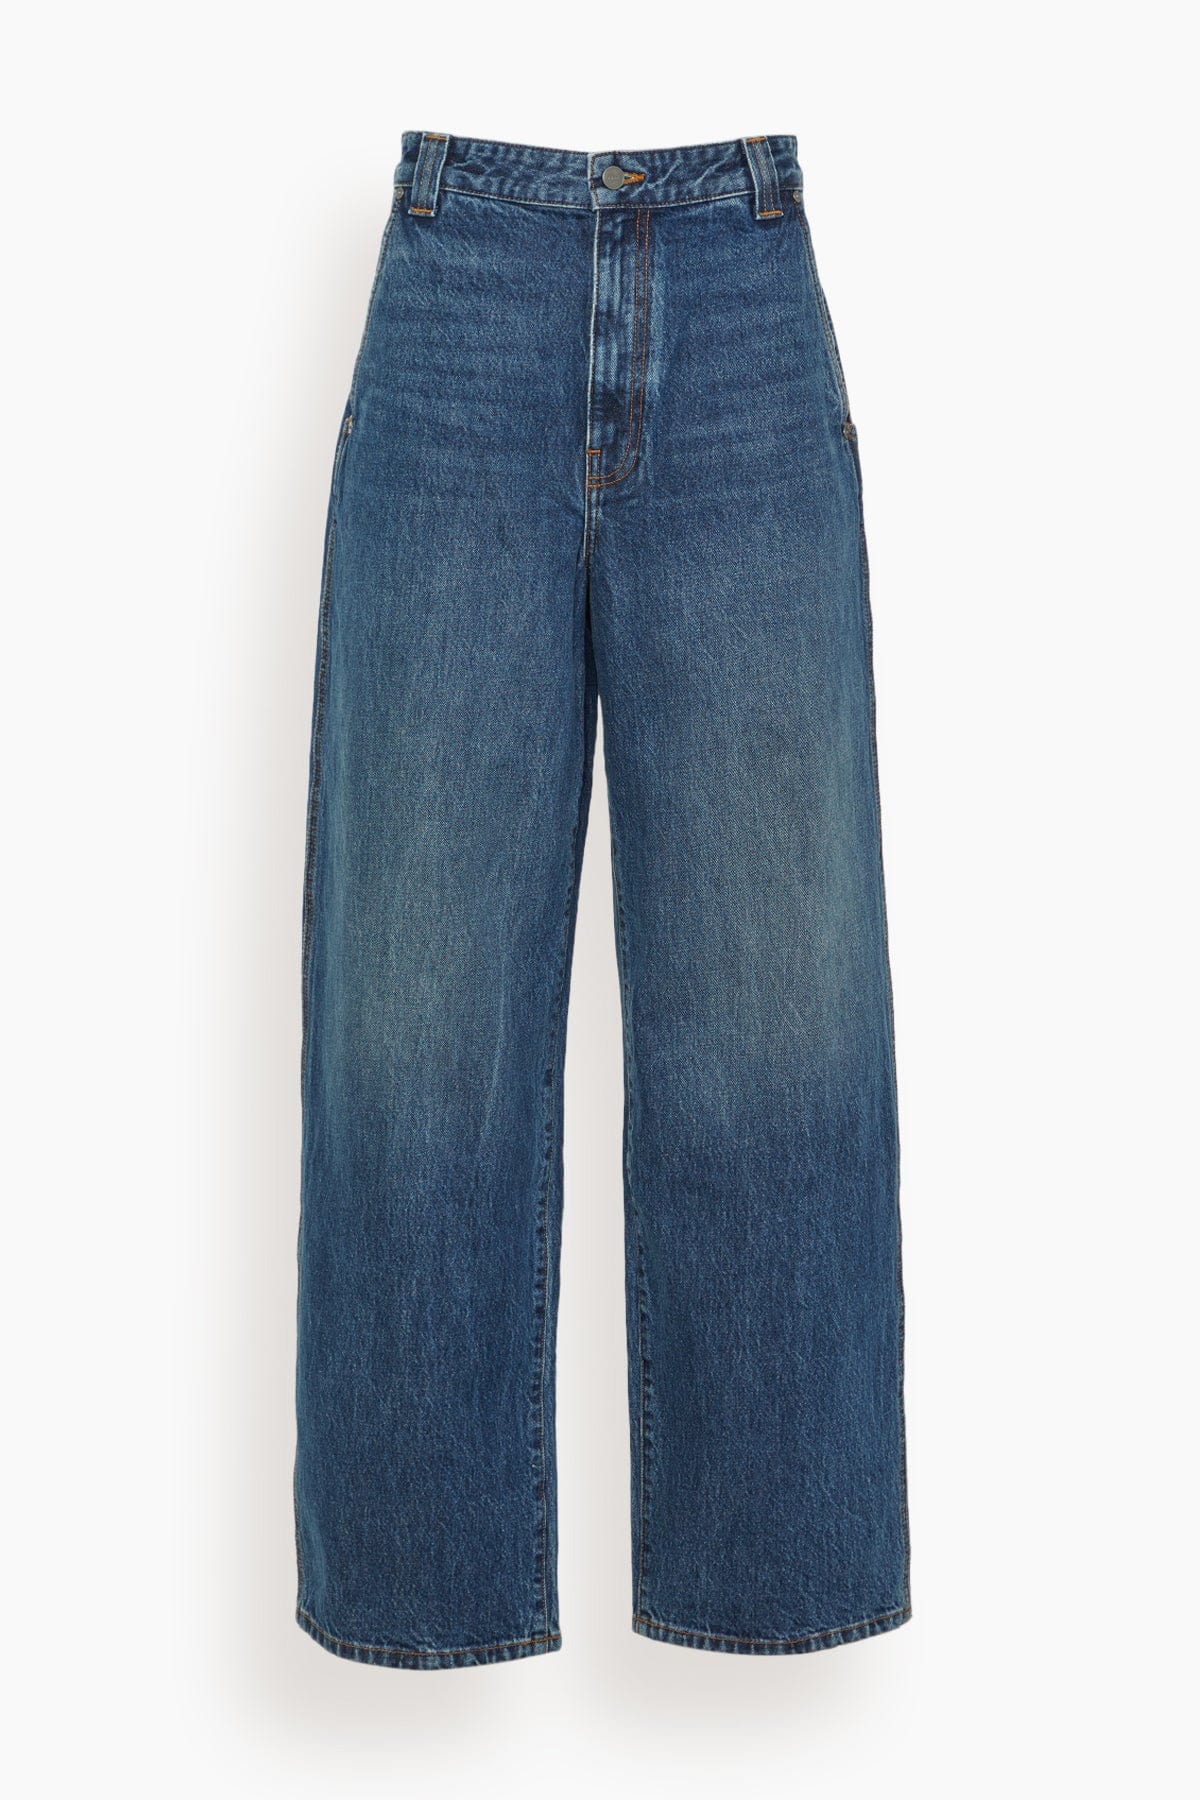 Khaite Jeans Bacall Jean in Archer